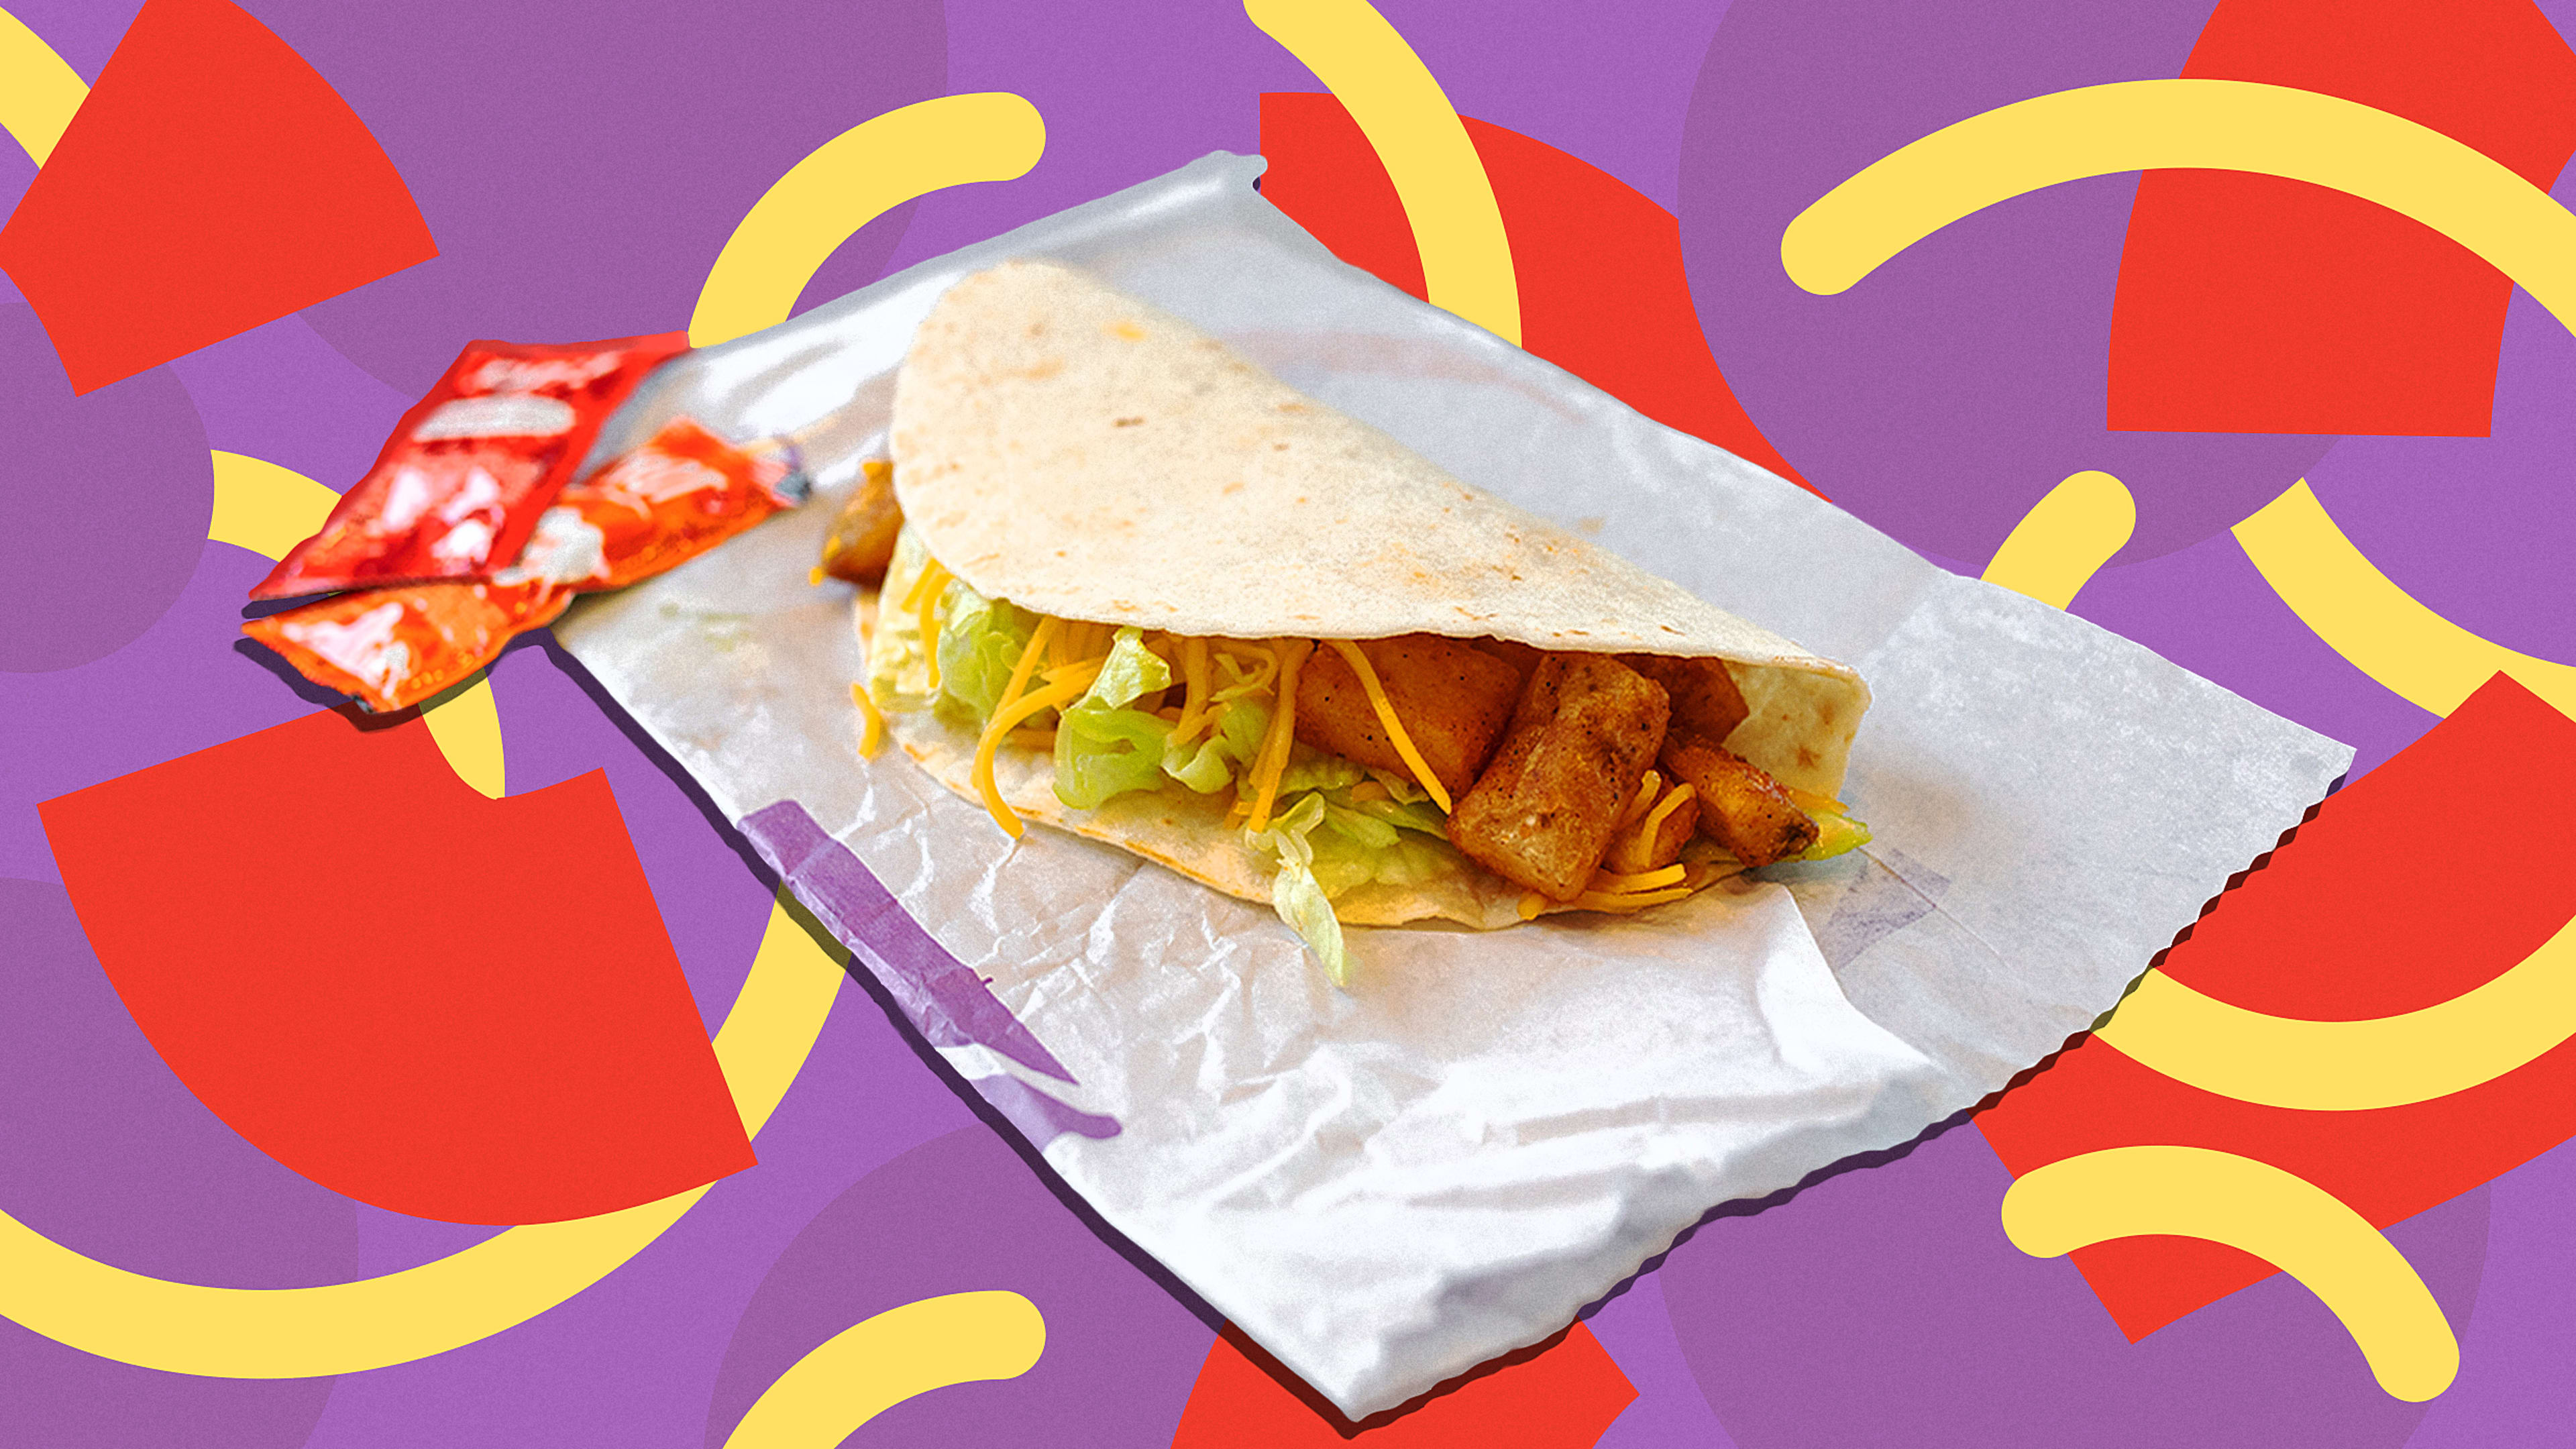 Taco Bell is secretly a haven for vegetarians—and it’s adding even more meatless options